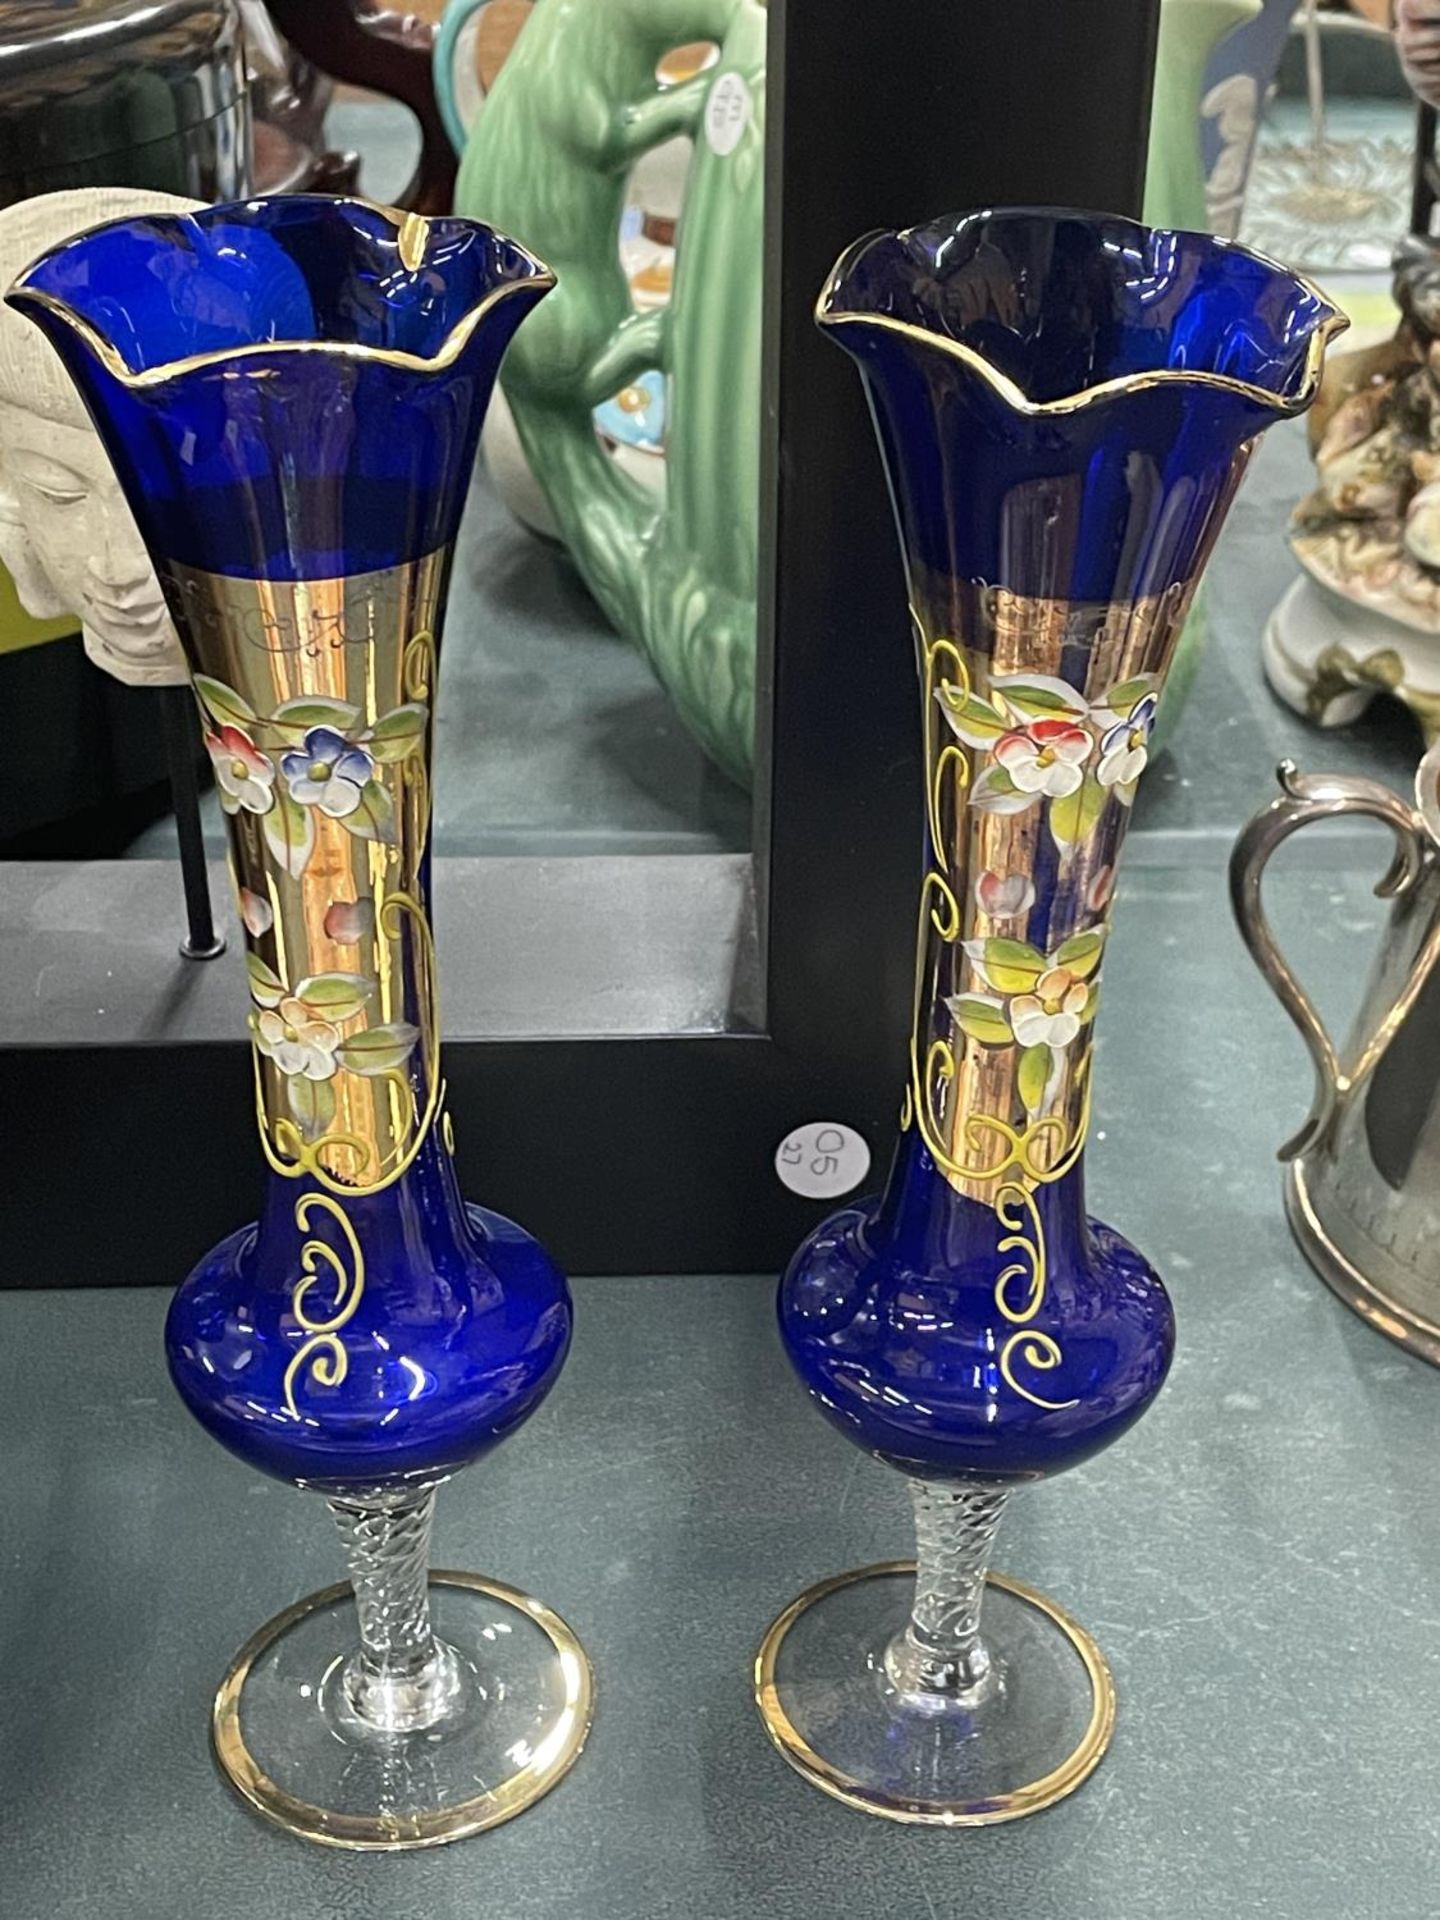 A PAIR OF VINTAGE BOHEMIAN GLASS VASES IN COBALT BLUE WITH HANDPAINTED FLORAL DECORATION, HEIGHT